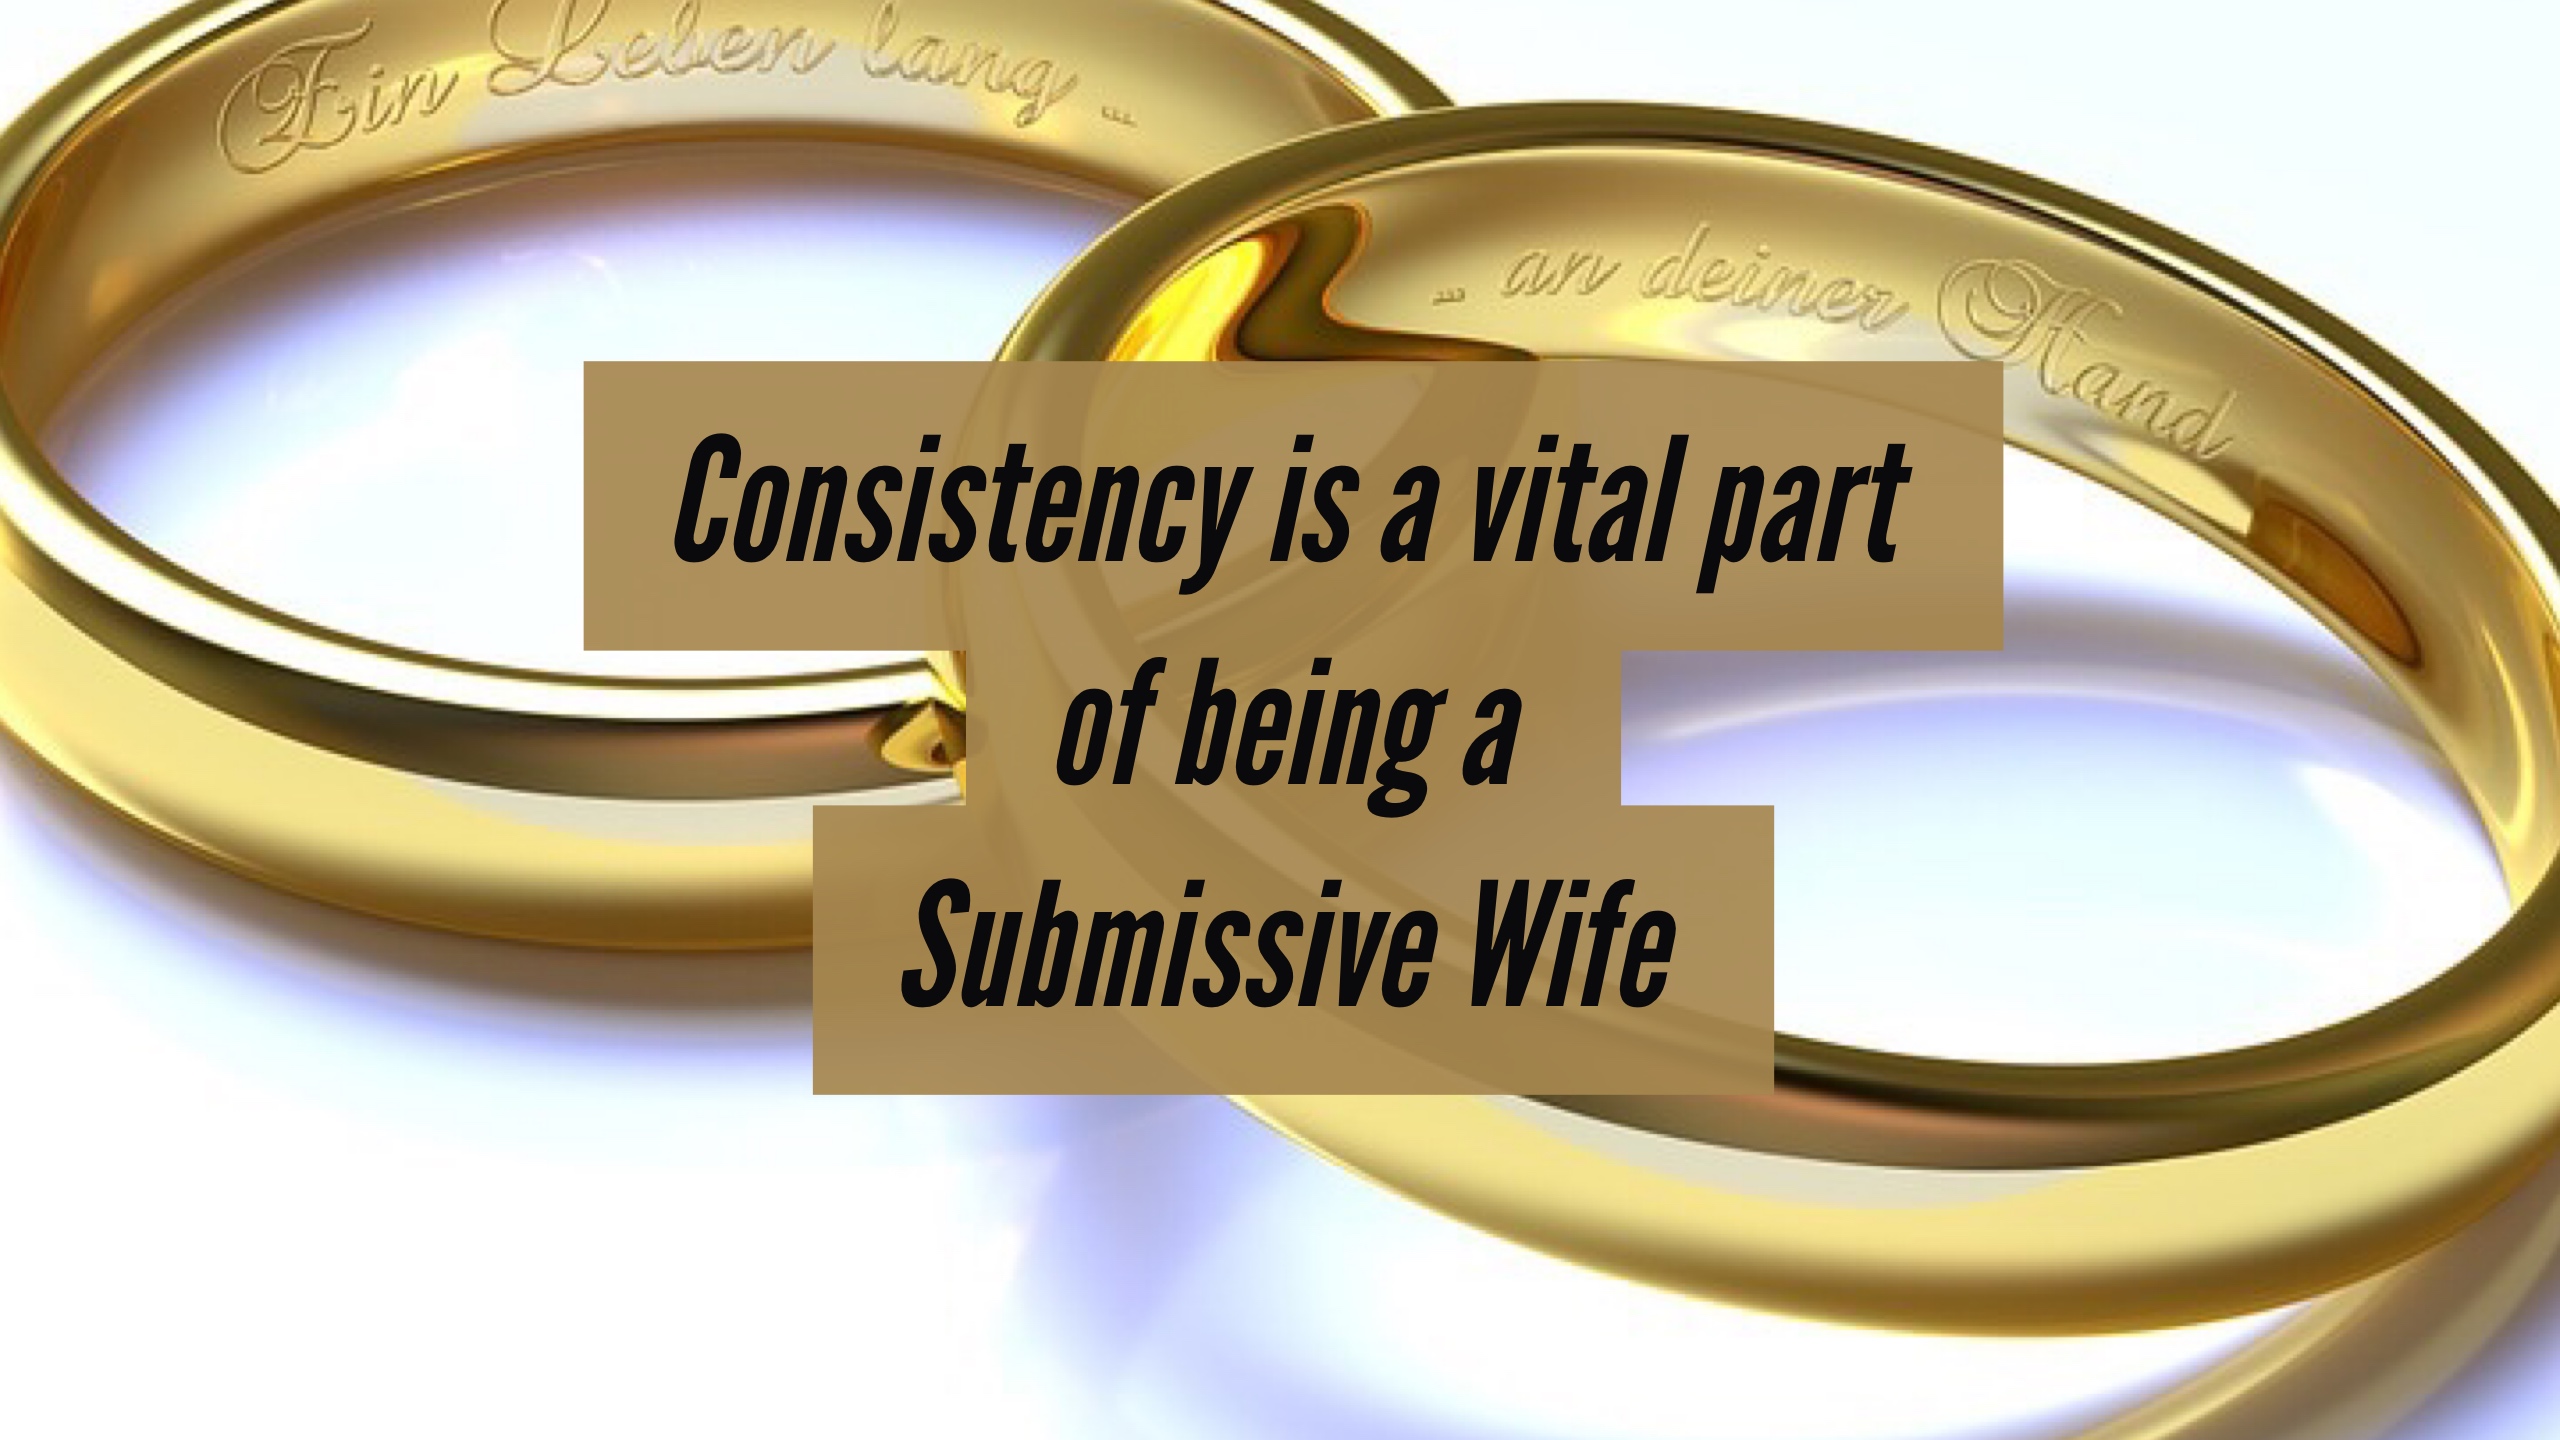 Consistency is a vital part of being a Submissive Wife